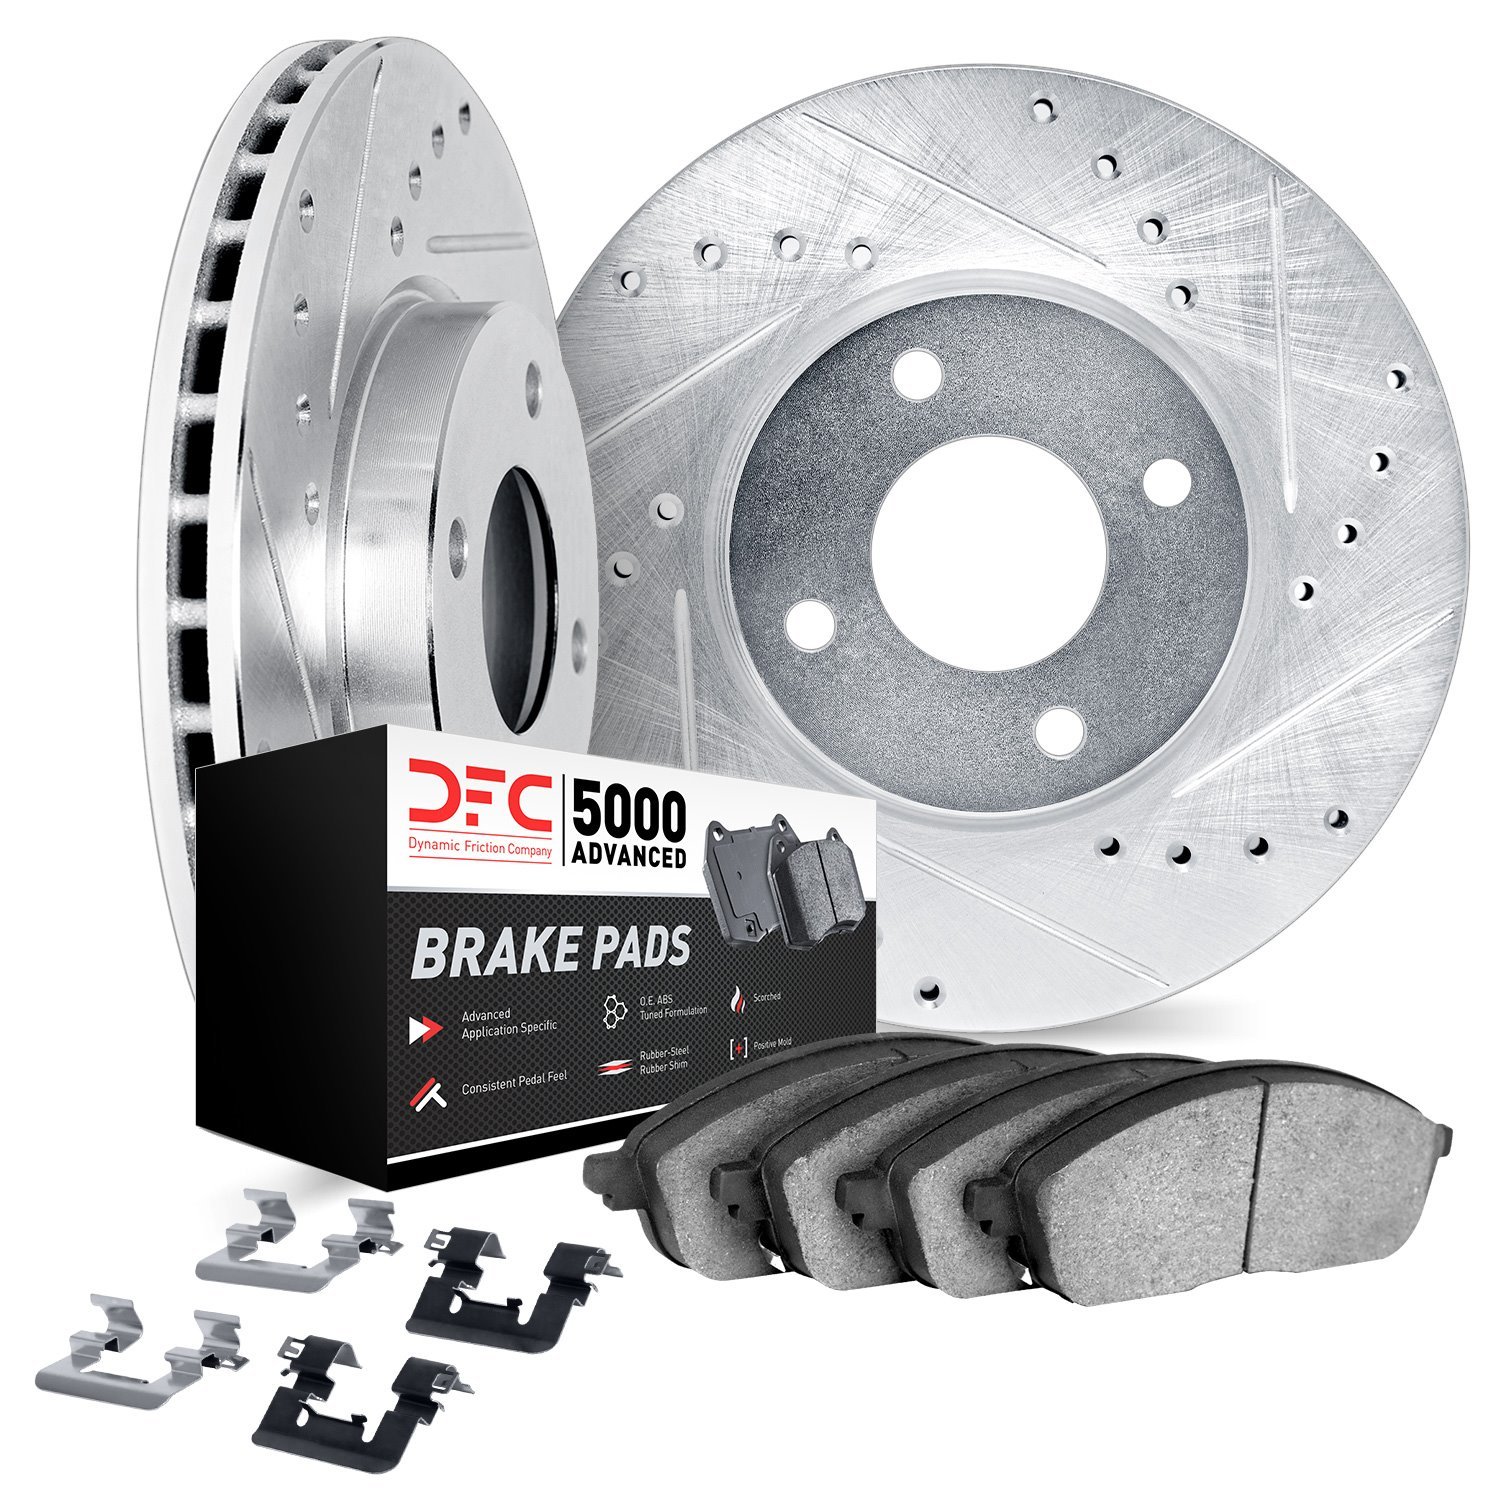 7512-67122 Drilled/Slotted Brake Rotors w/5000 Advanced Brake Pads Kit & Hardware [Silver], Fits Select Infiniti/Nissan, Positio